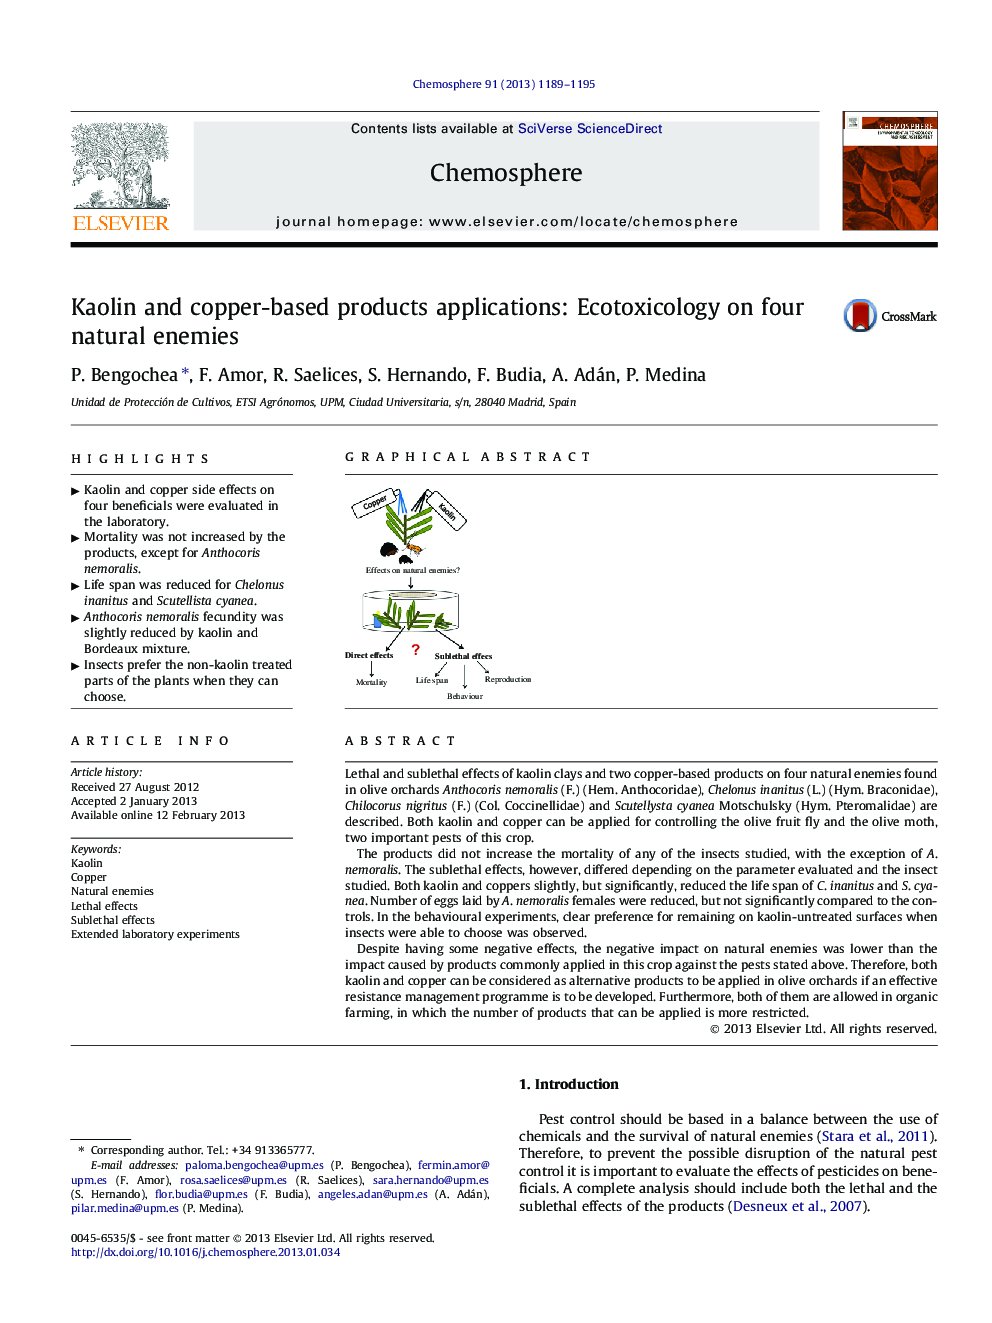 Kaolin and copper-based products applications: Ecotoxicology on four natural enemies